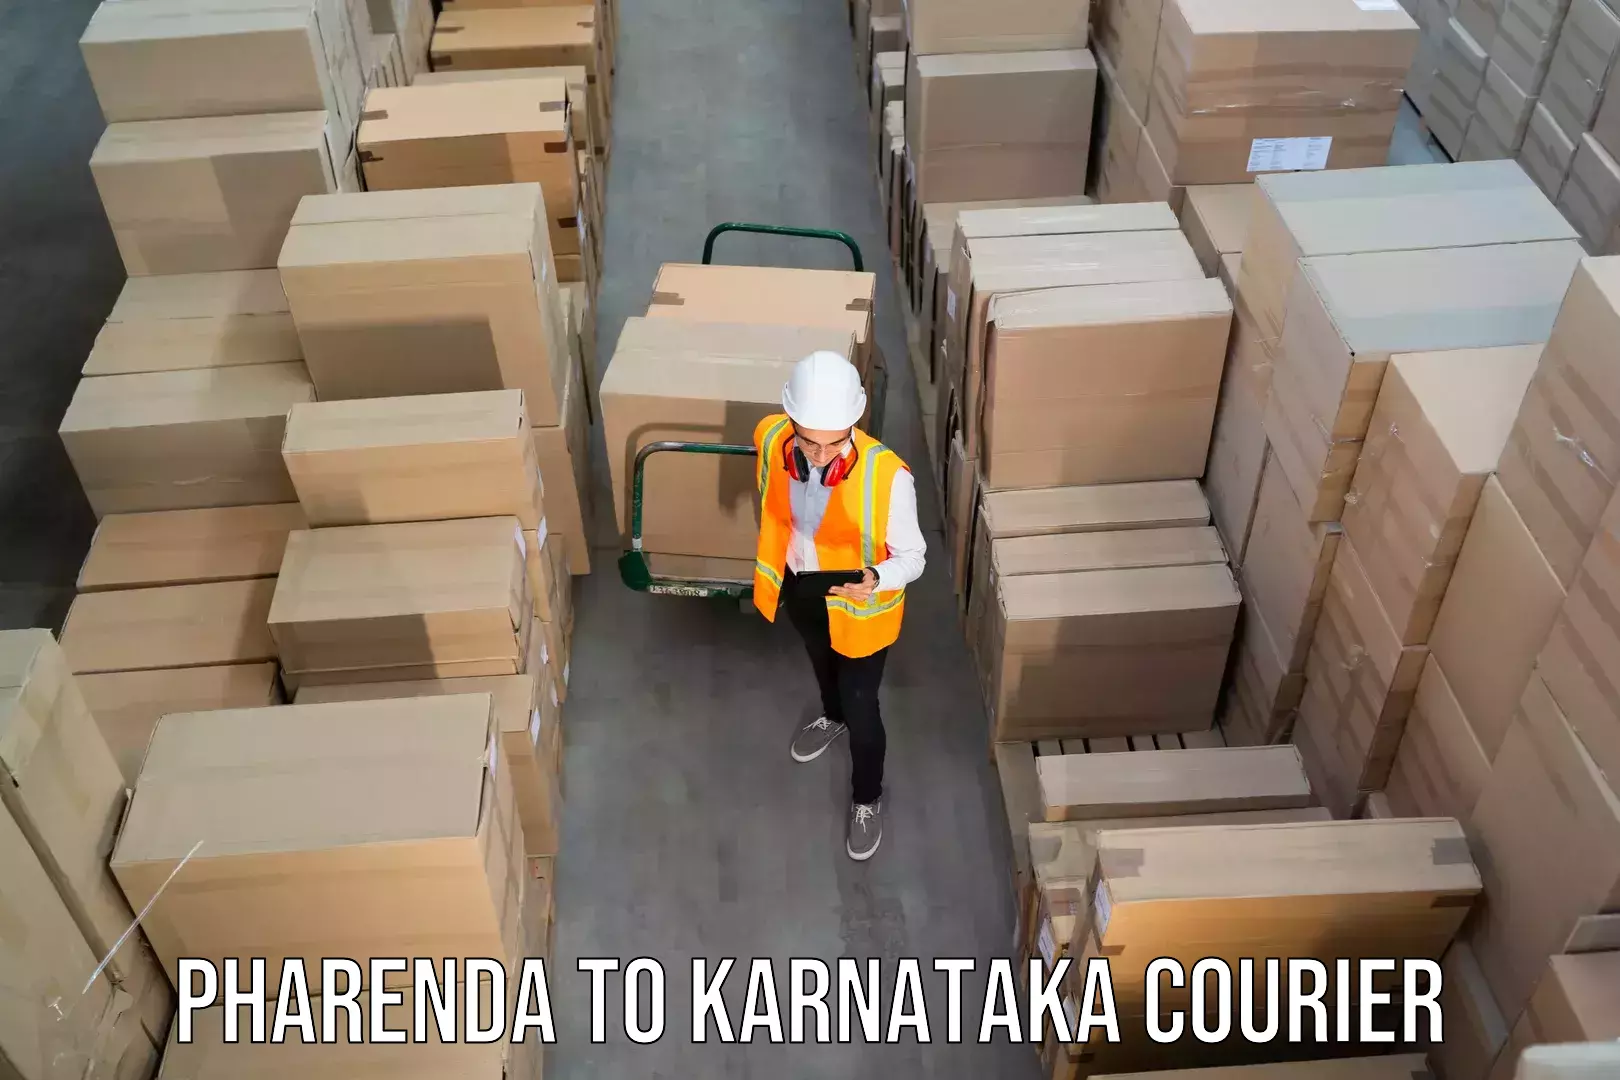 Reliable courier services Pharenda to Bangalore